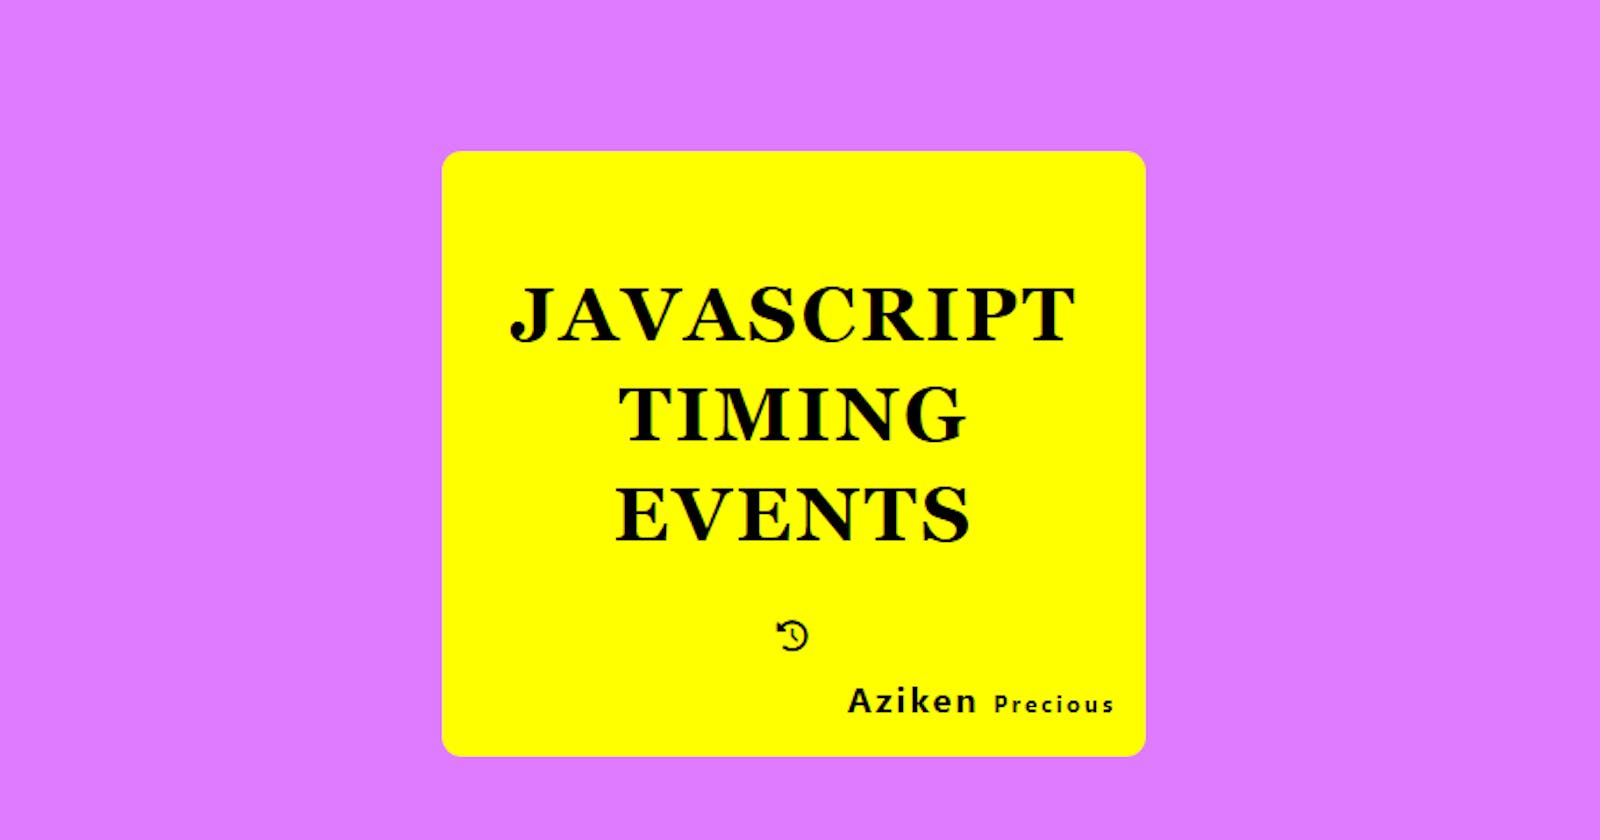 How To Use The Javascript Timing Events